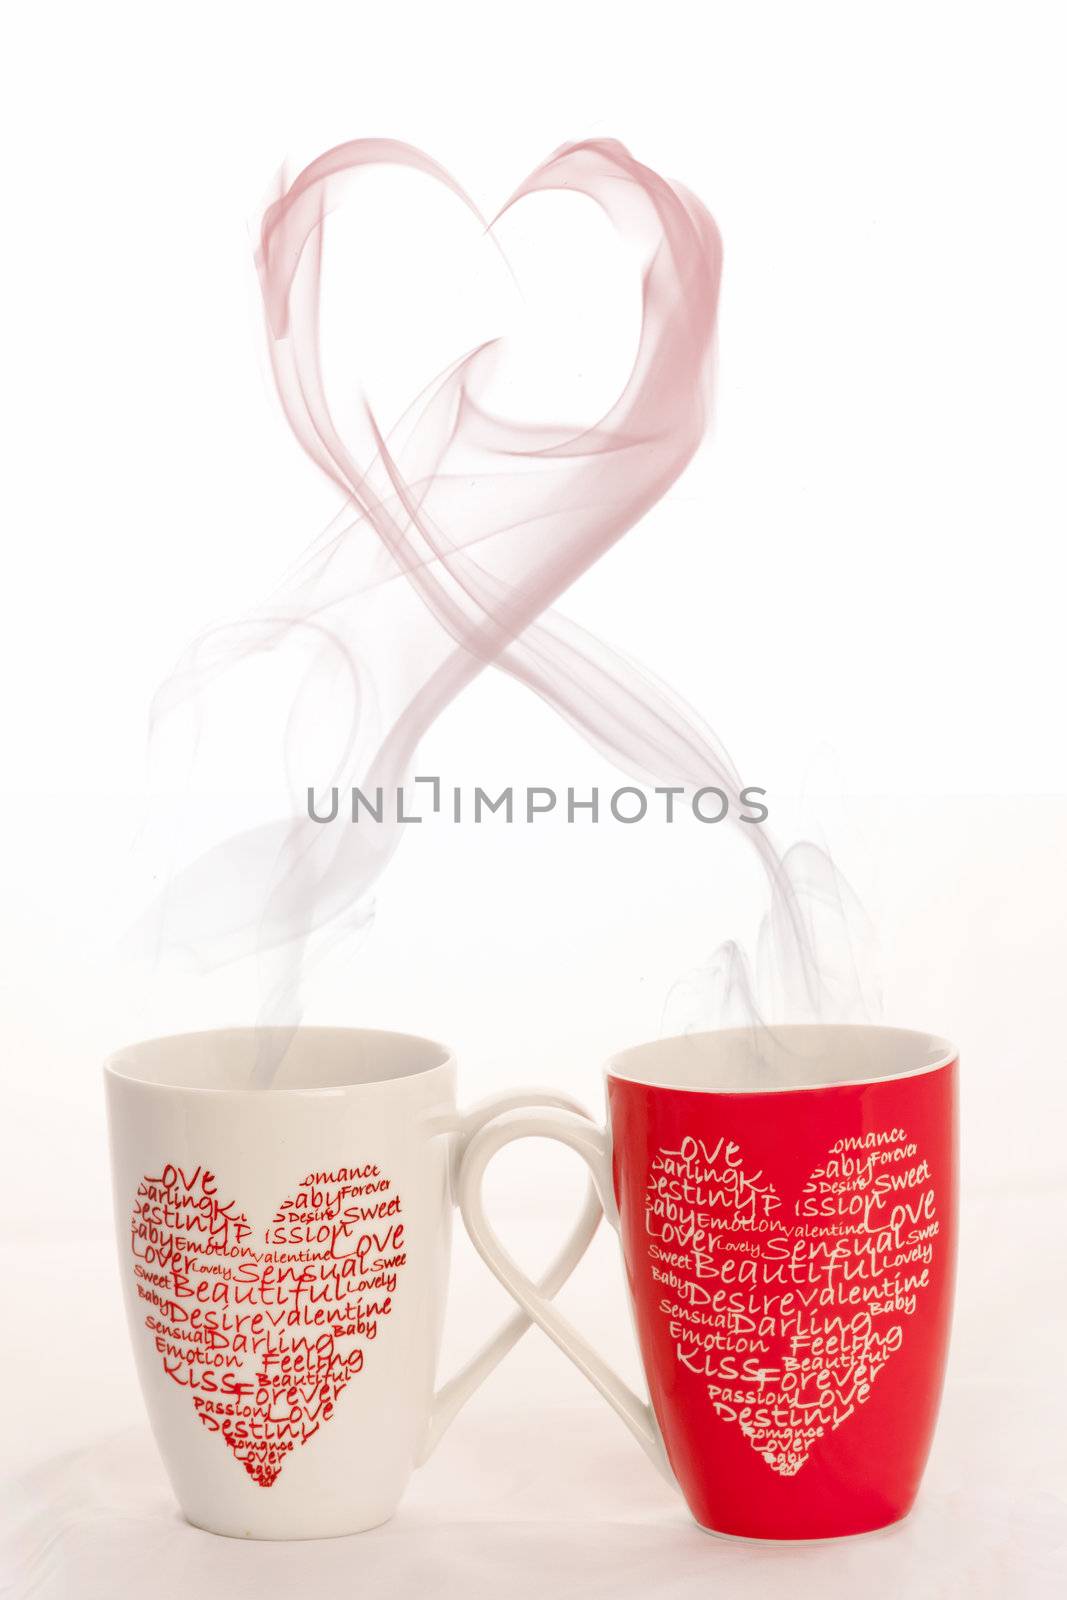 2 coffee cups with herats creating smoke in the shape of a heart on a white background